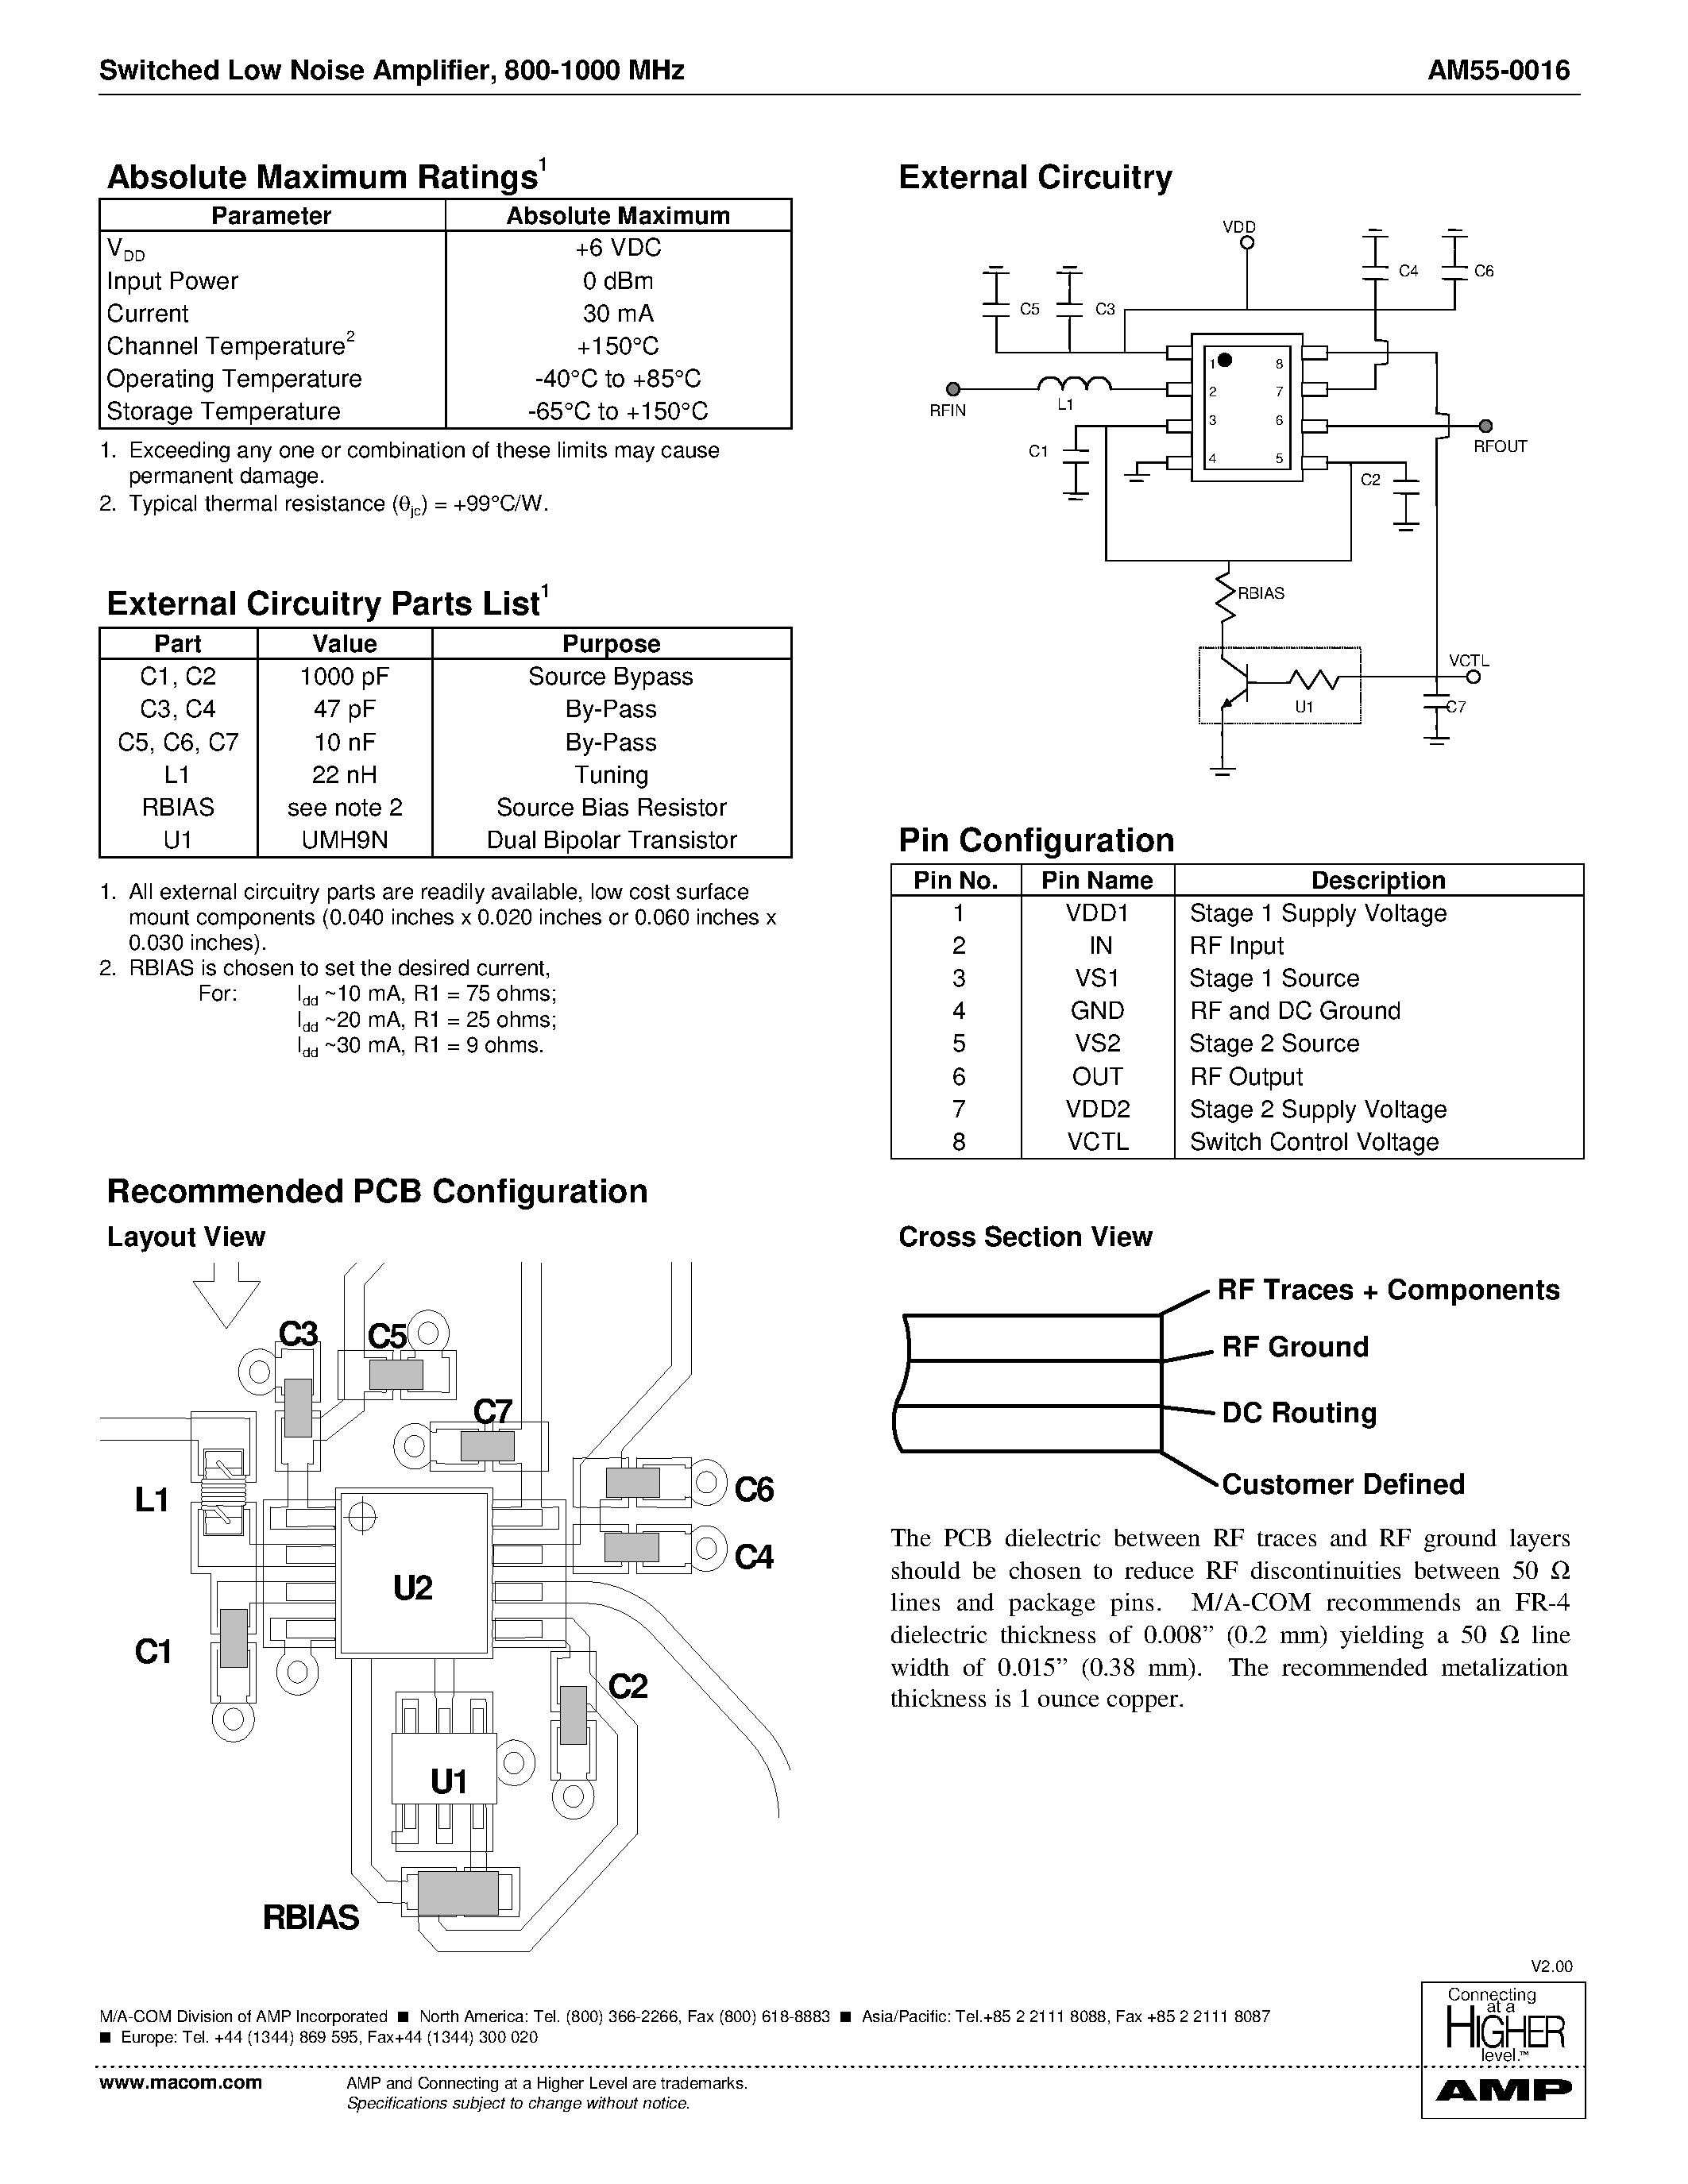 Datasheet AM55-0016 - Switched Low Noise Amplifier 800 - 1000 MHz page 2